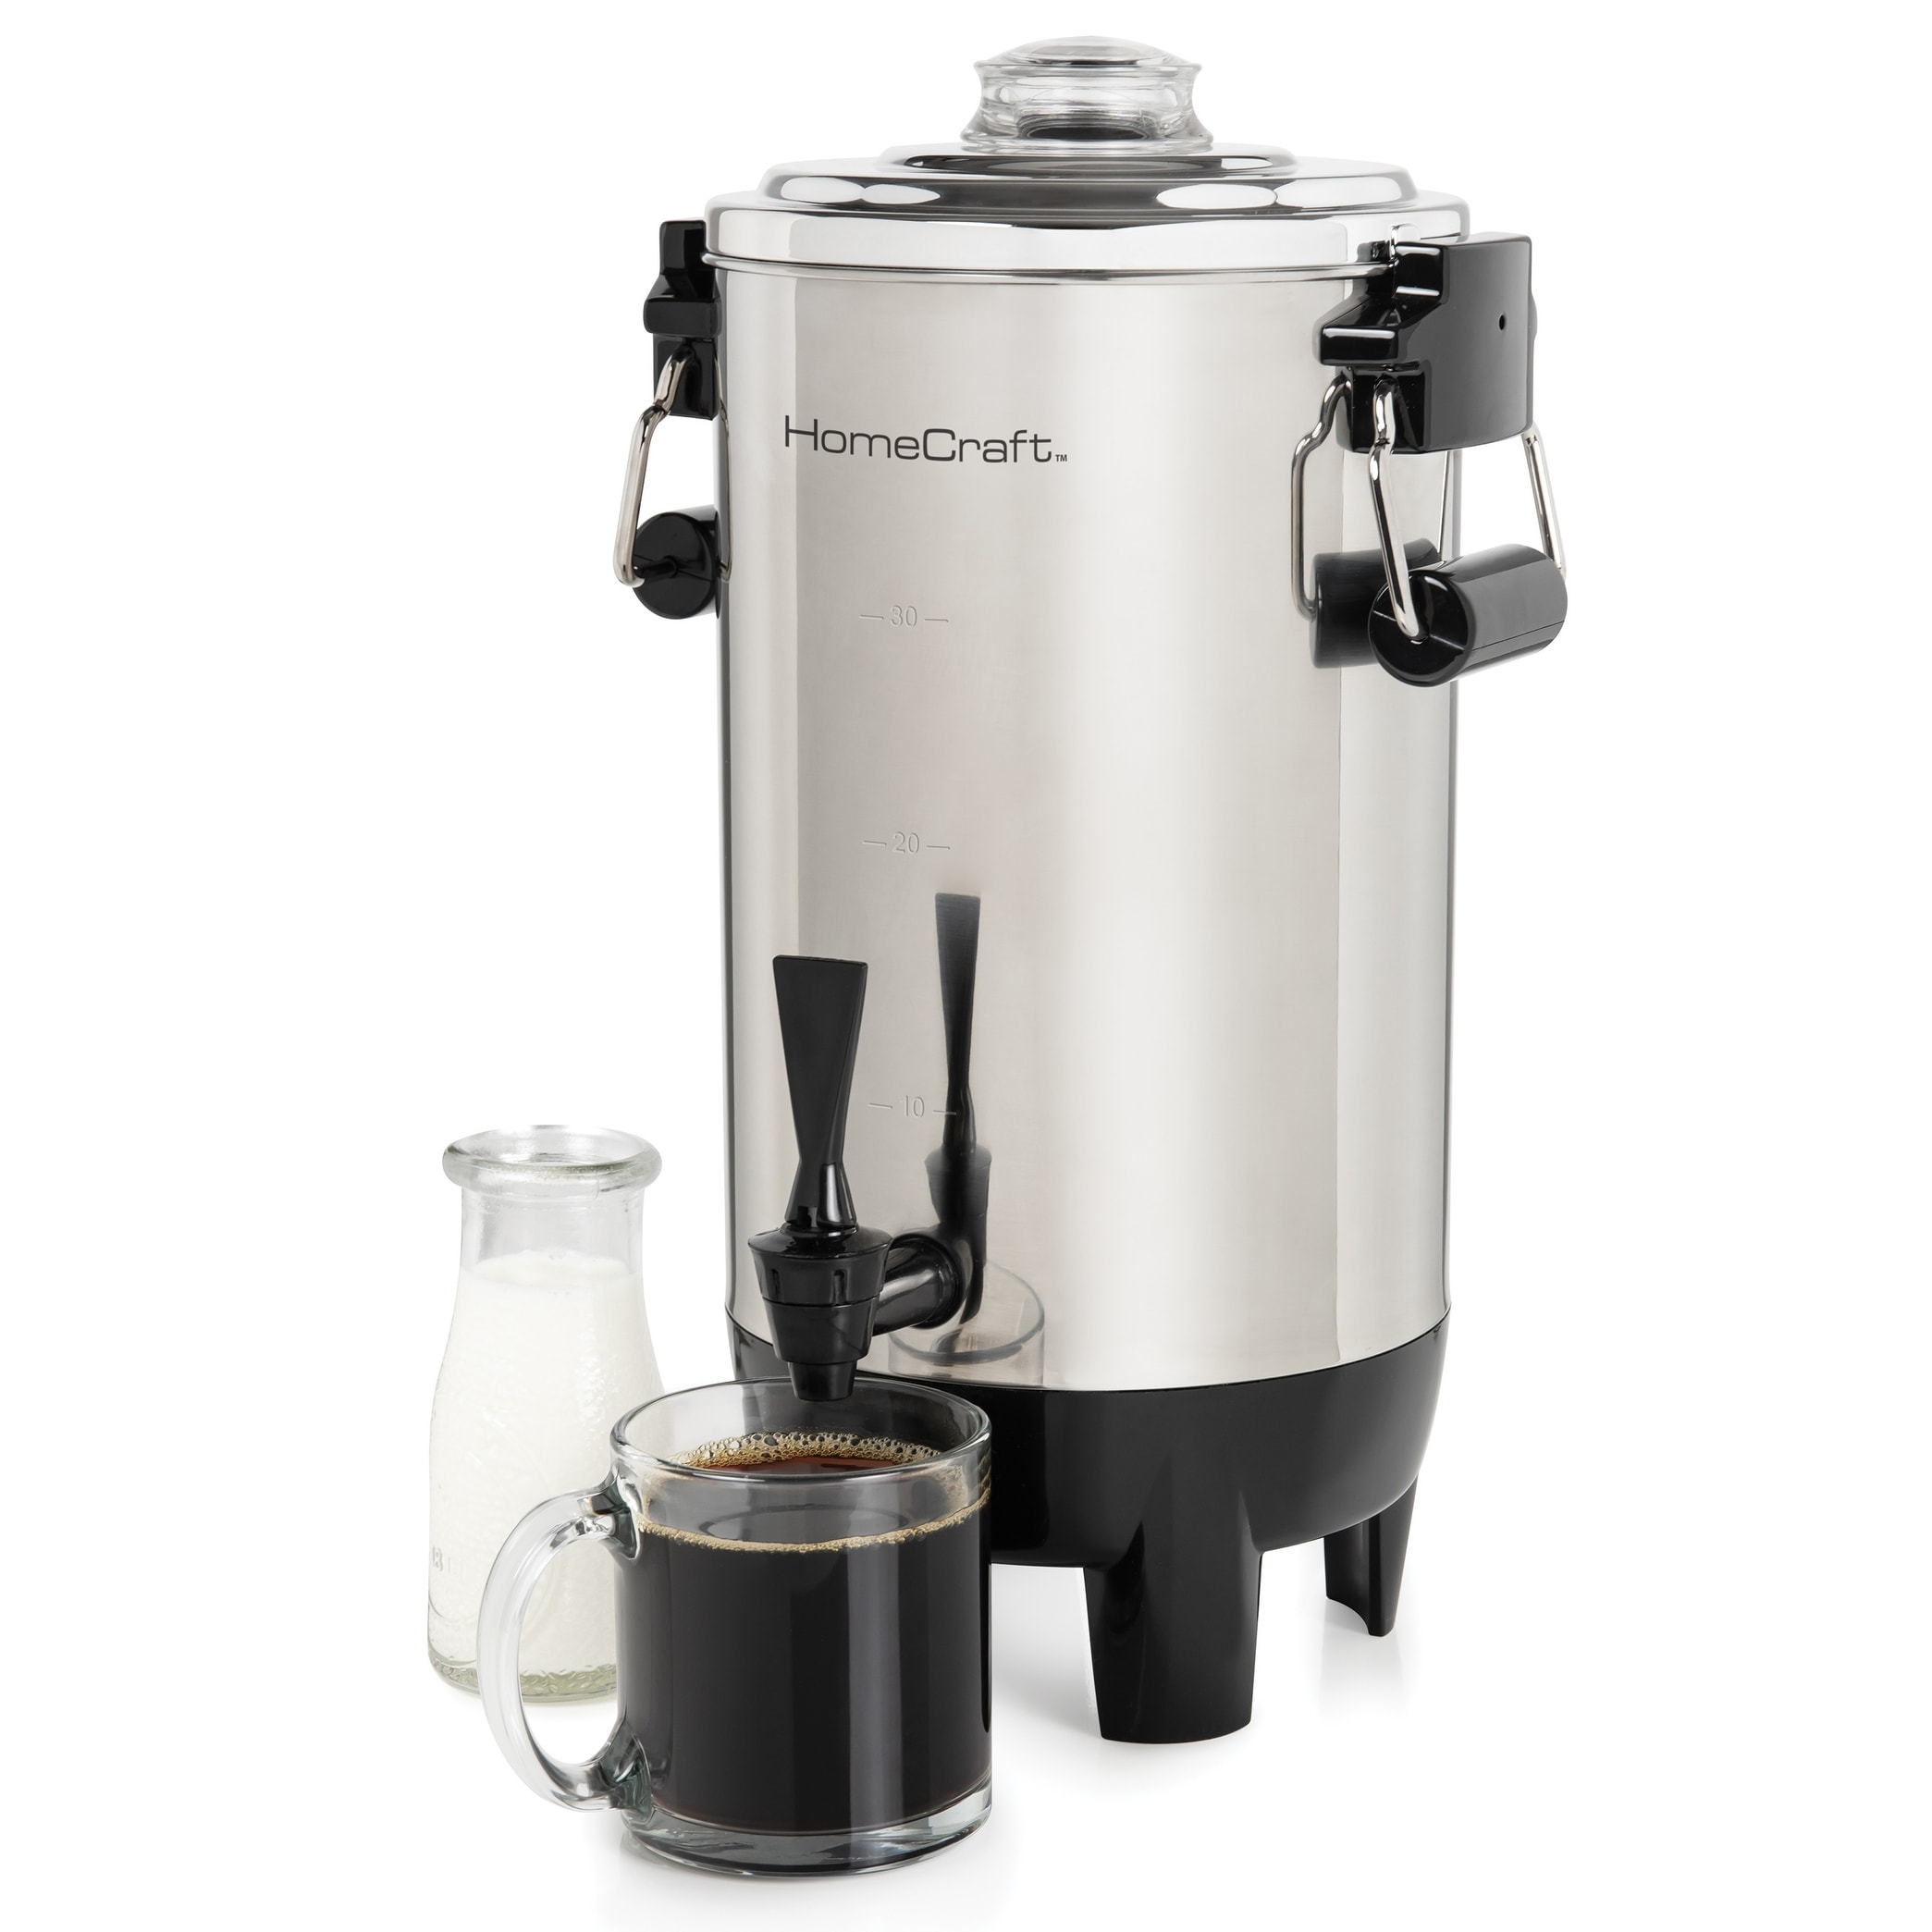 https://ak1.ostkcdn.com/images/products/is/images/direct/ba3c23598bfe2efec3cdbff4e81daff35765168a/HomeCraft-HCCU30SS-Quick-Brewing-1000-Watt-Automatic-30-Cup-Coffee-Urn---Stainless-Steel.jpg